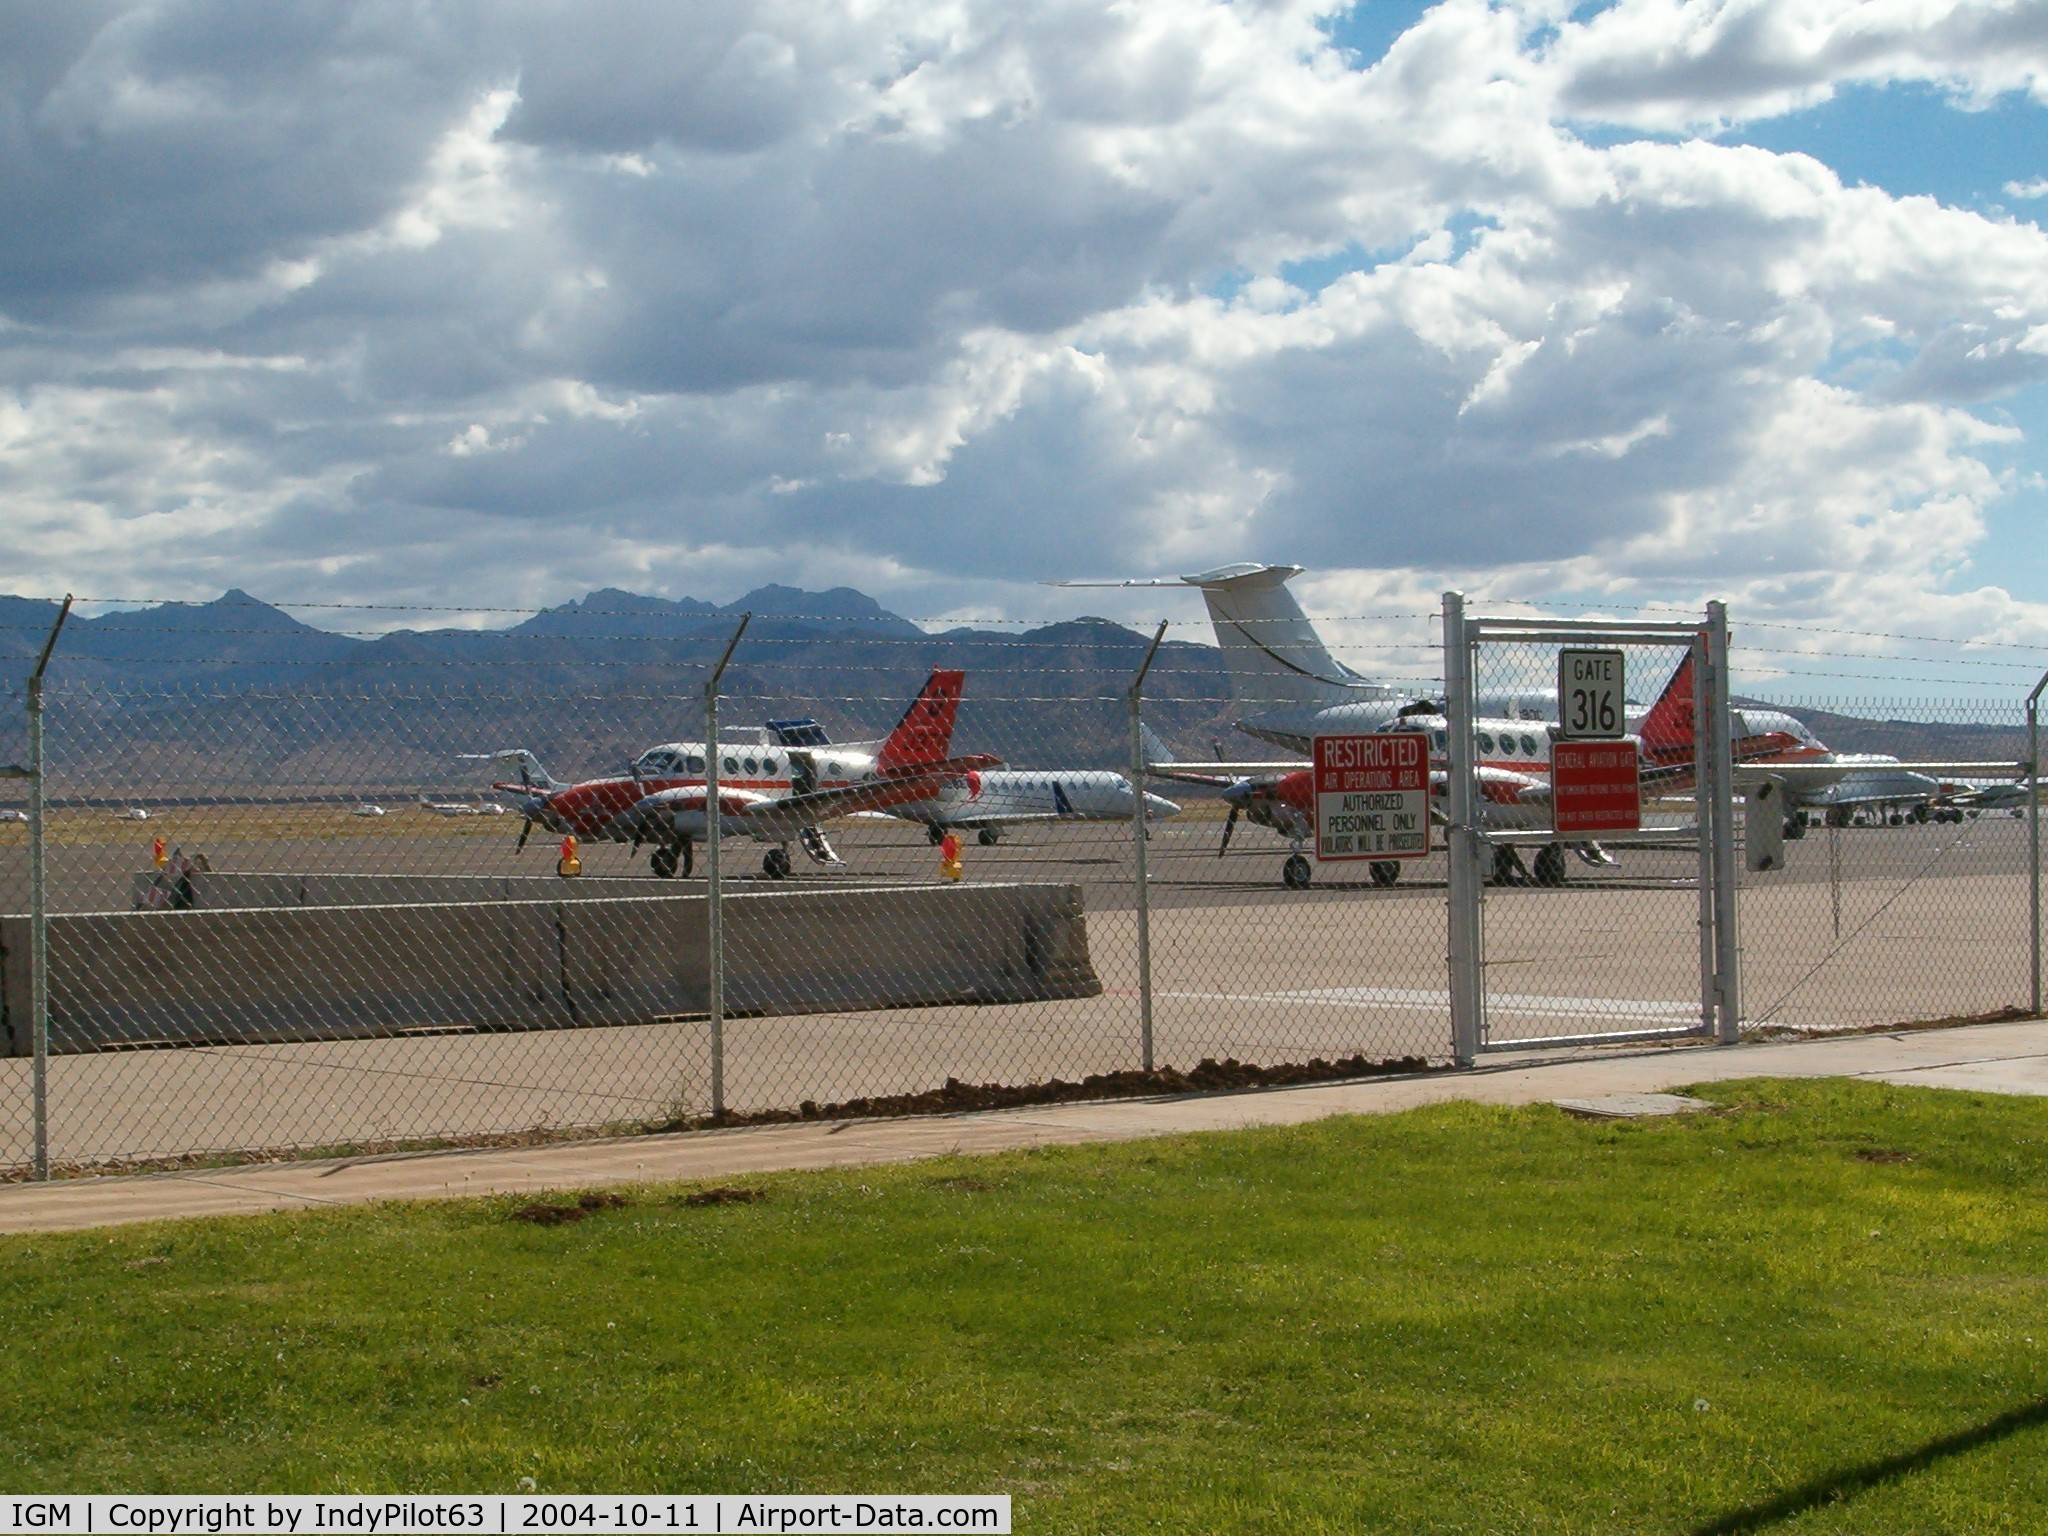 Kingman Airport (IGM) - Kingman's tarmac...this is about as close as I could get...